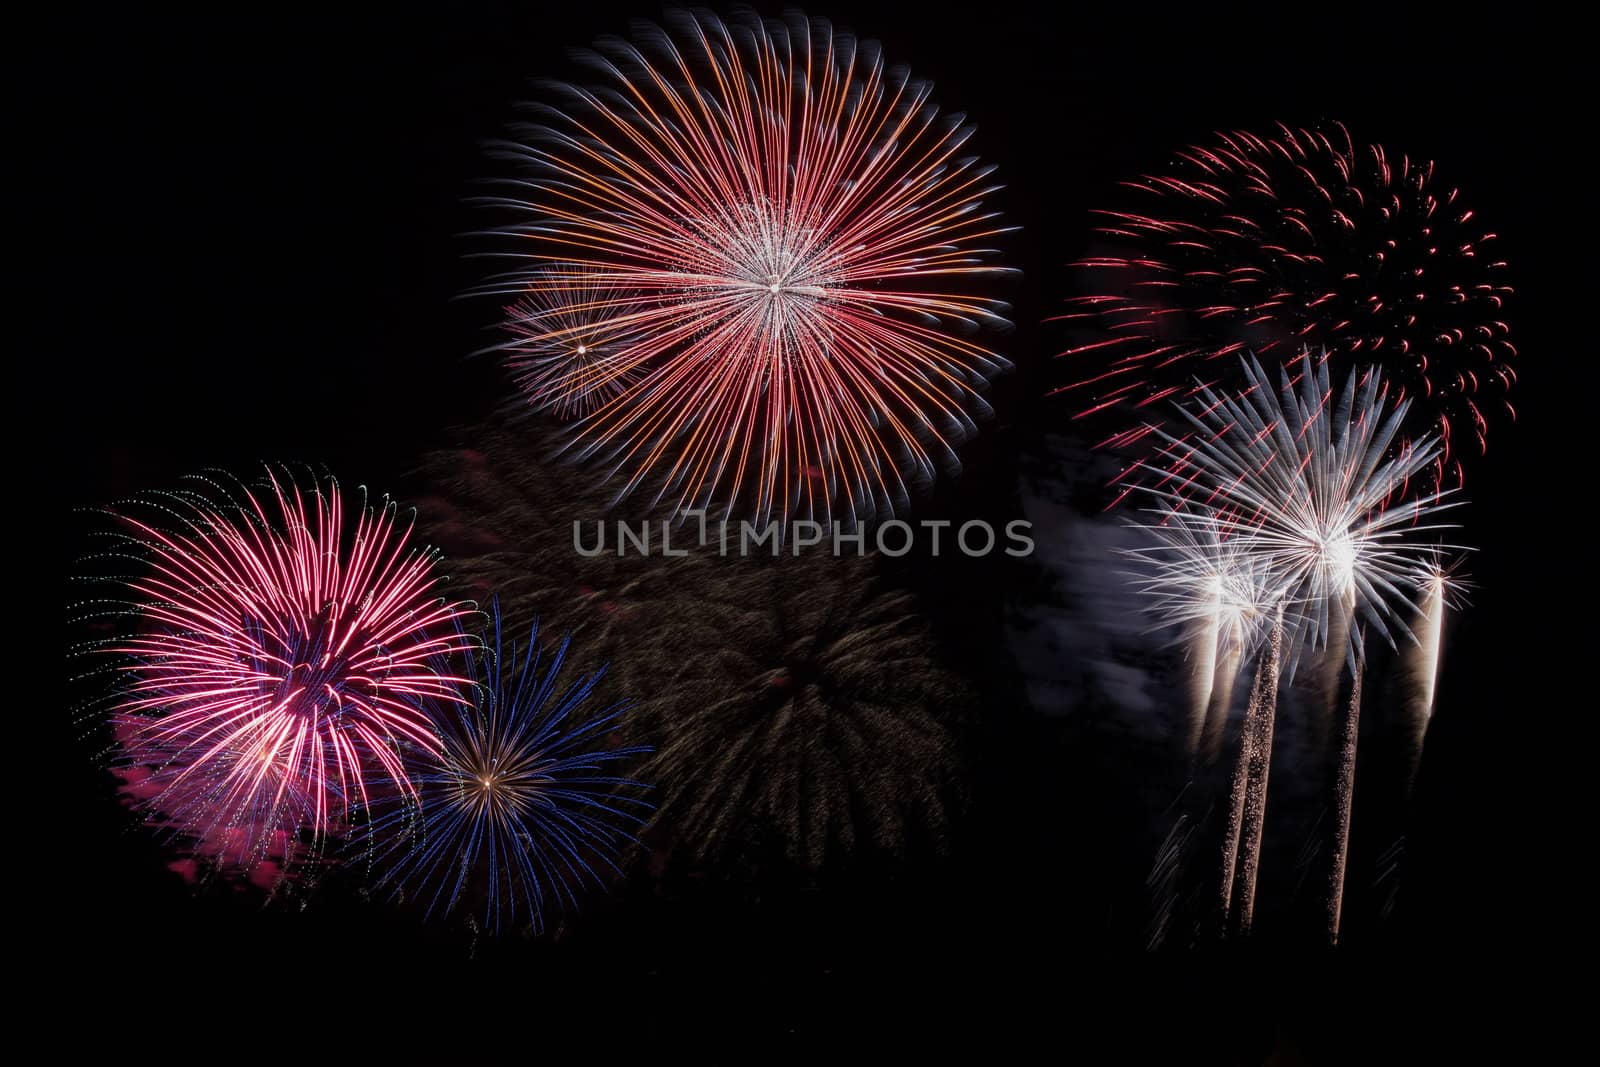 In images Fireworks Five - Five Fireworks Blast at 4th of July celebration in the United States